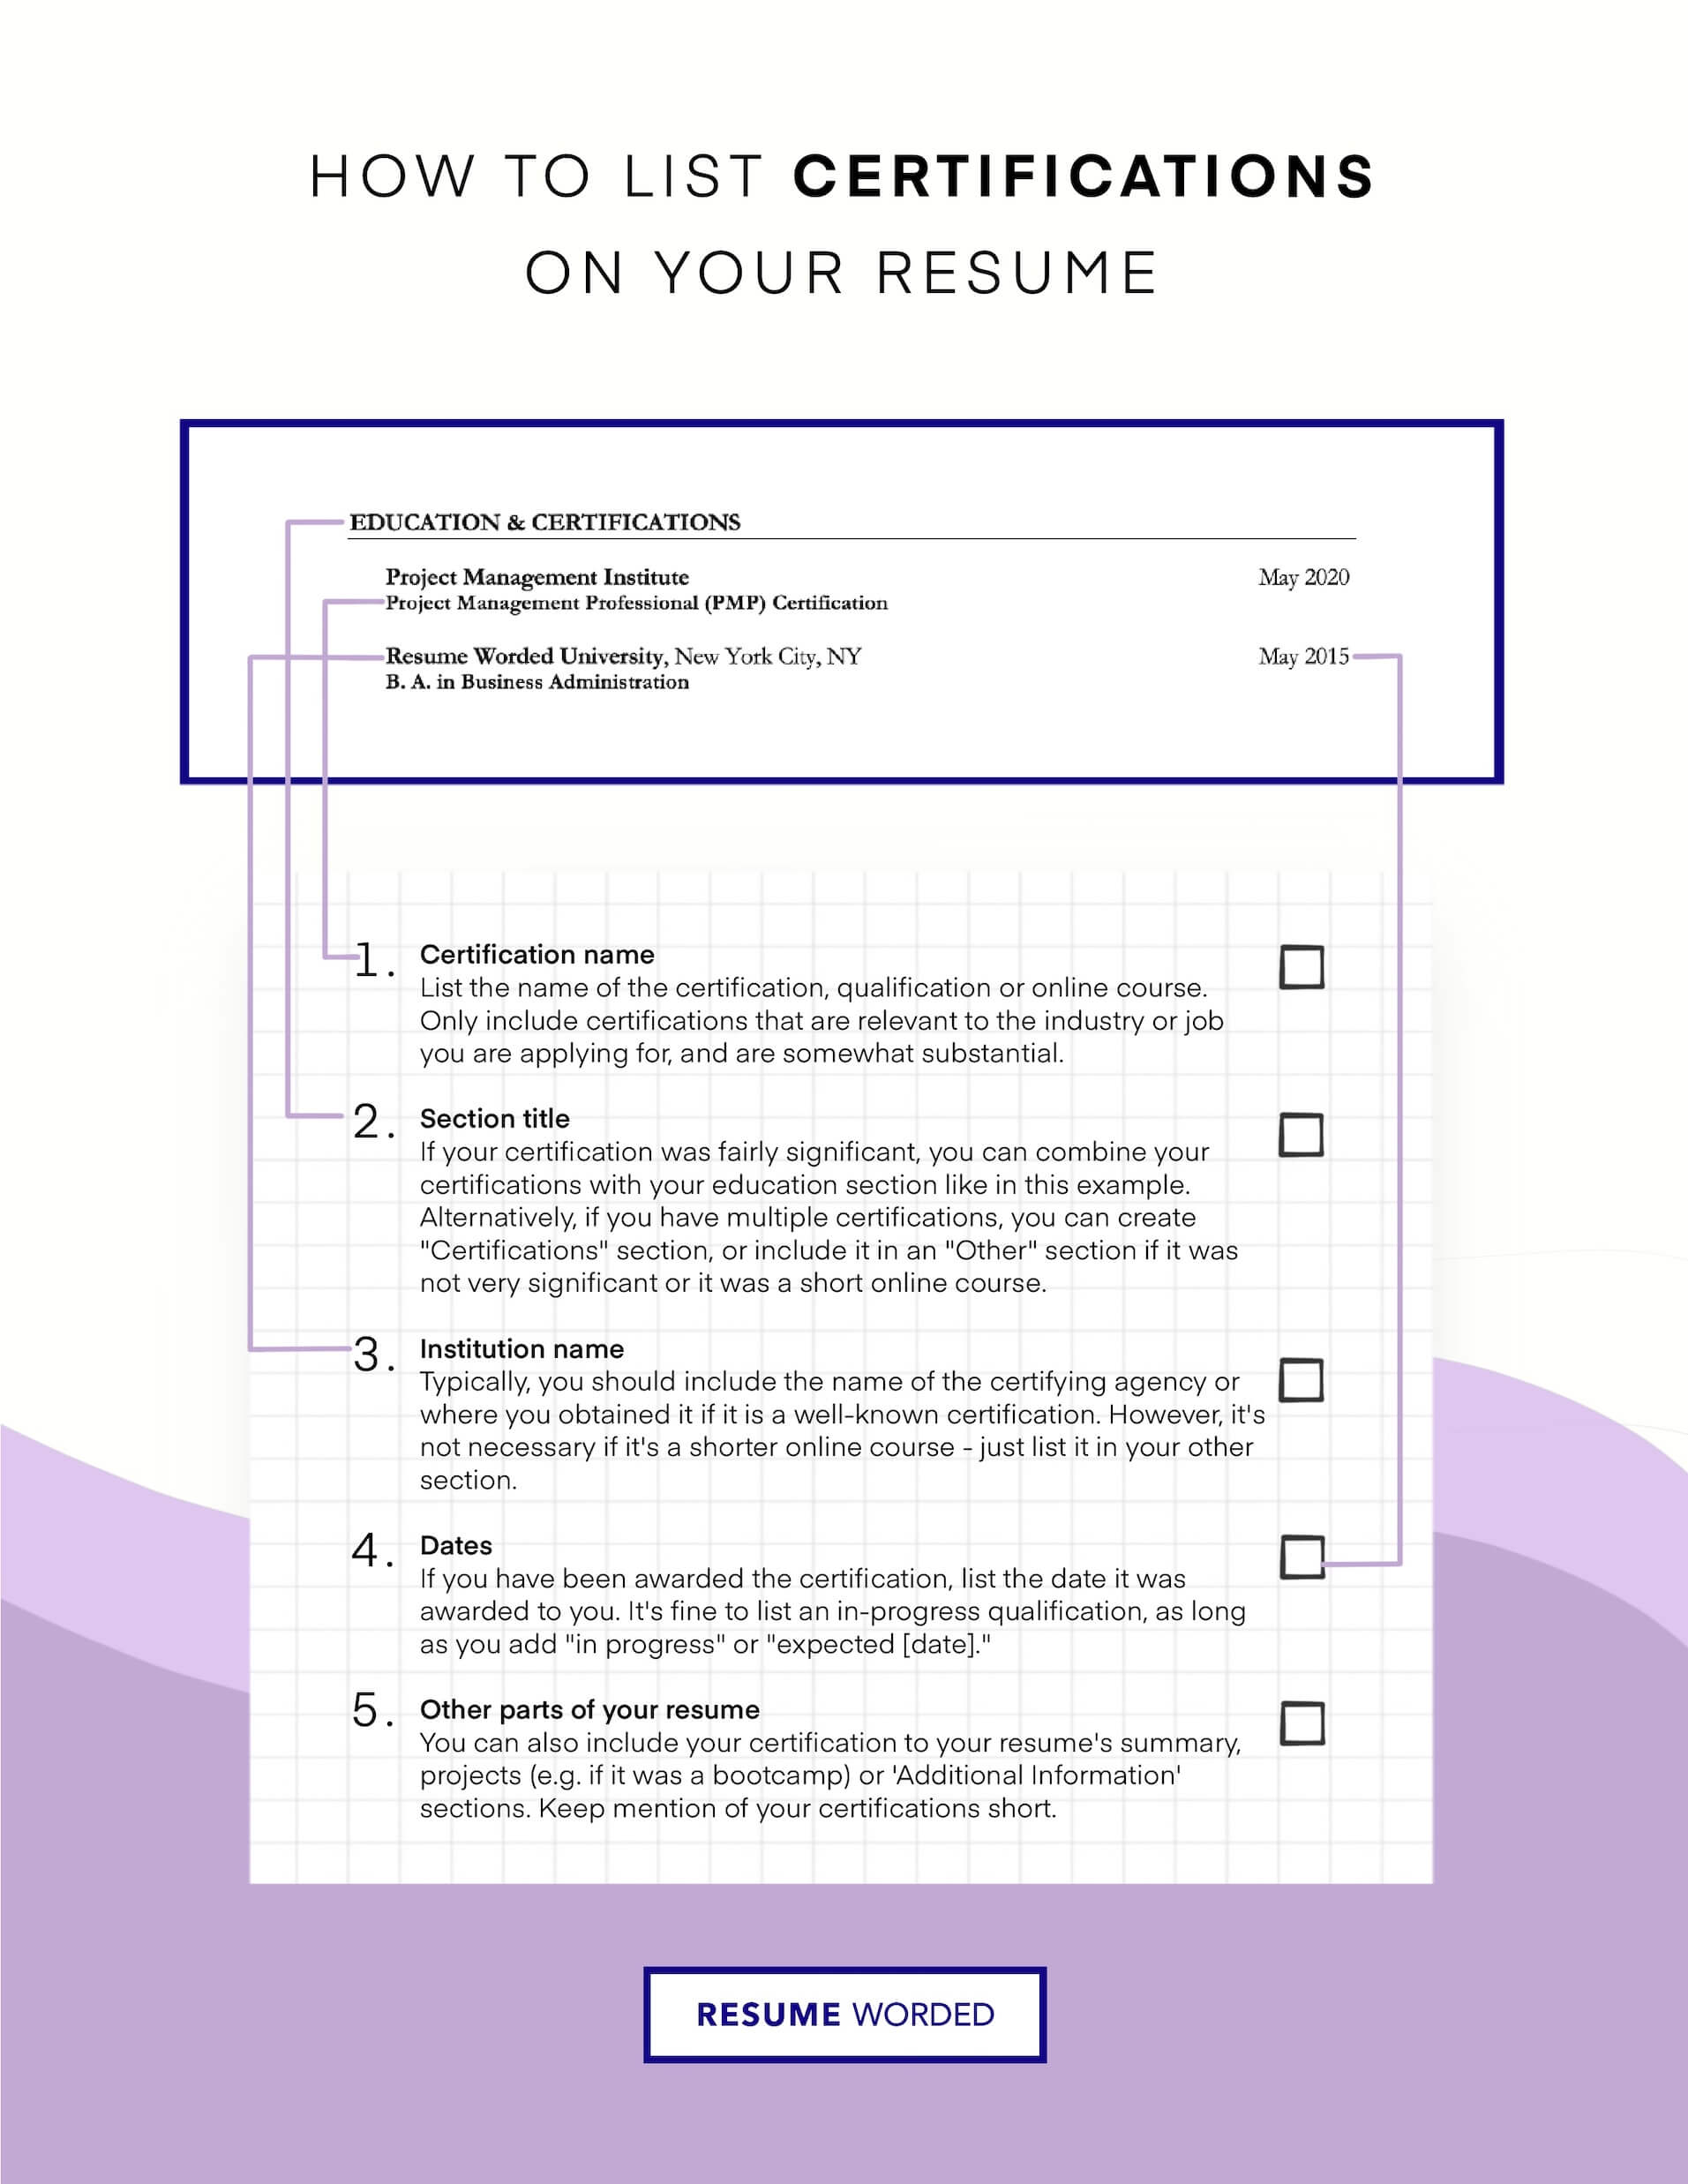 Include relevant Microsoft certifications. - Sharepoint Developer Resume